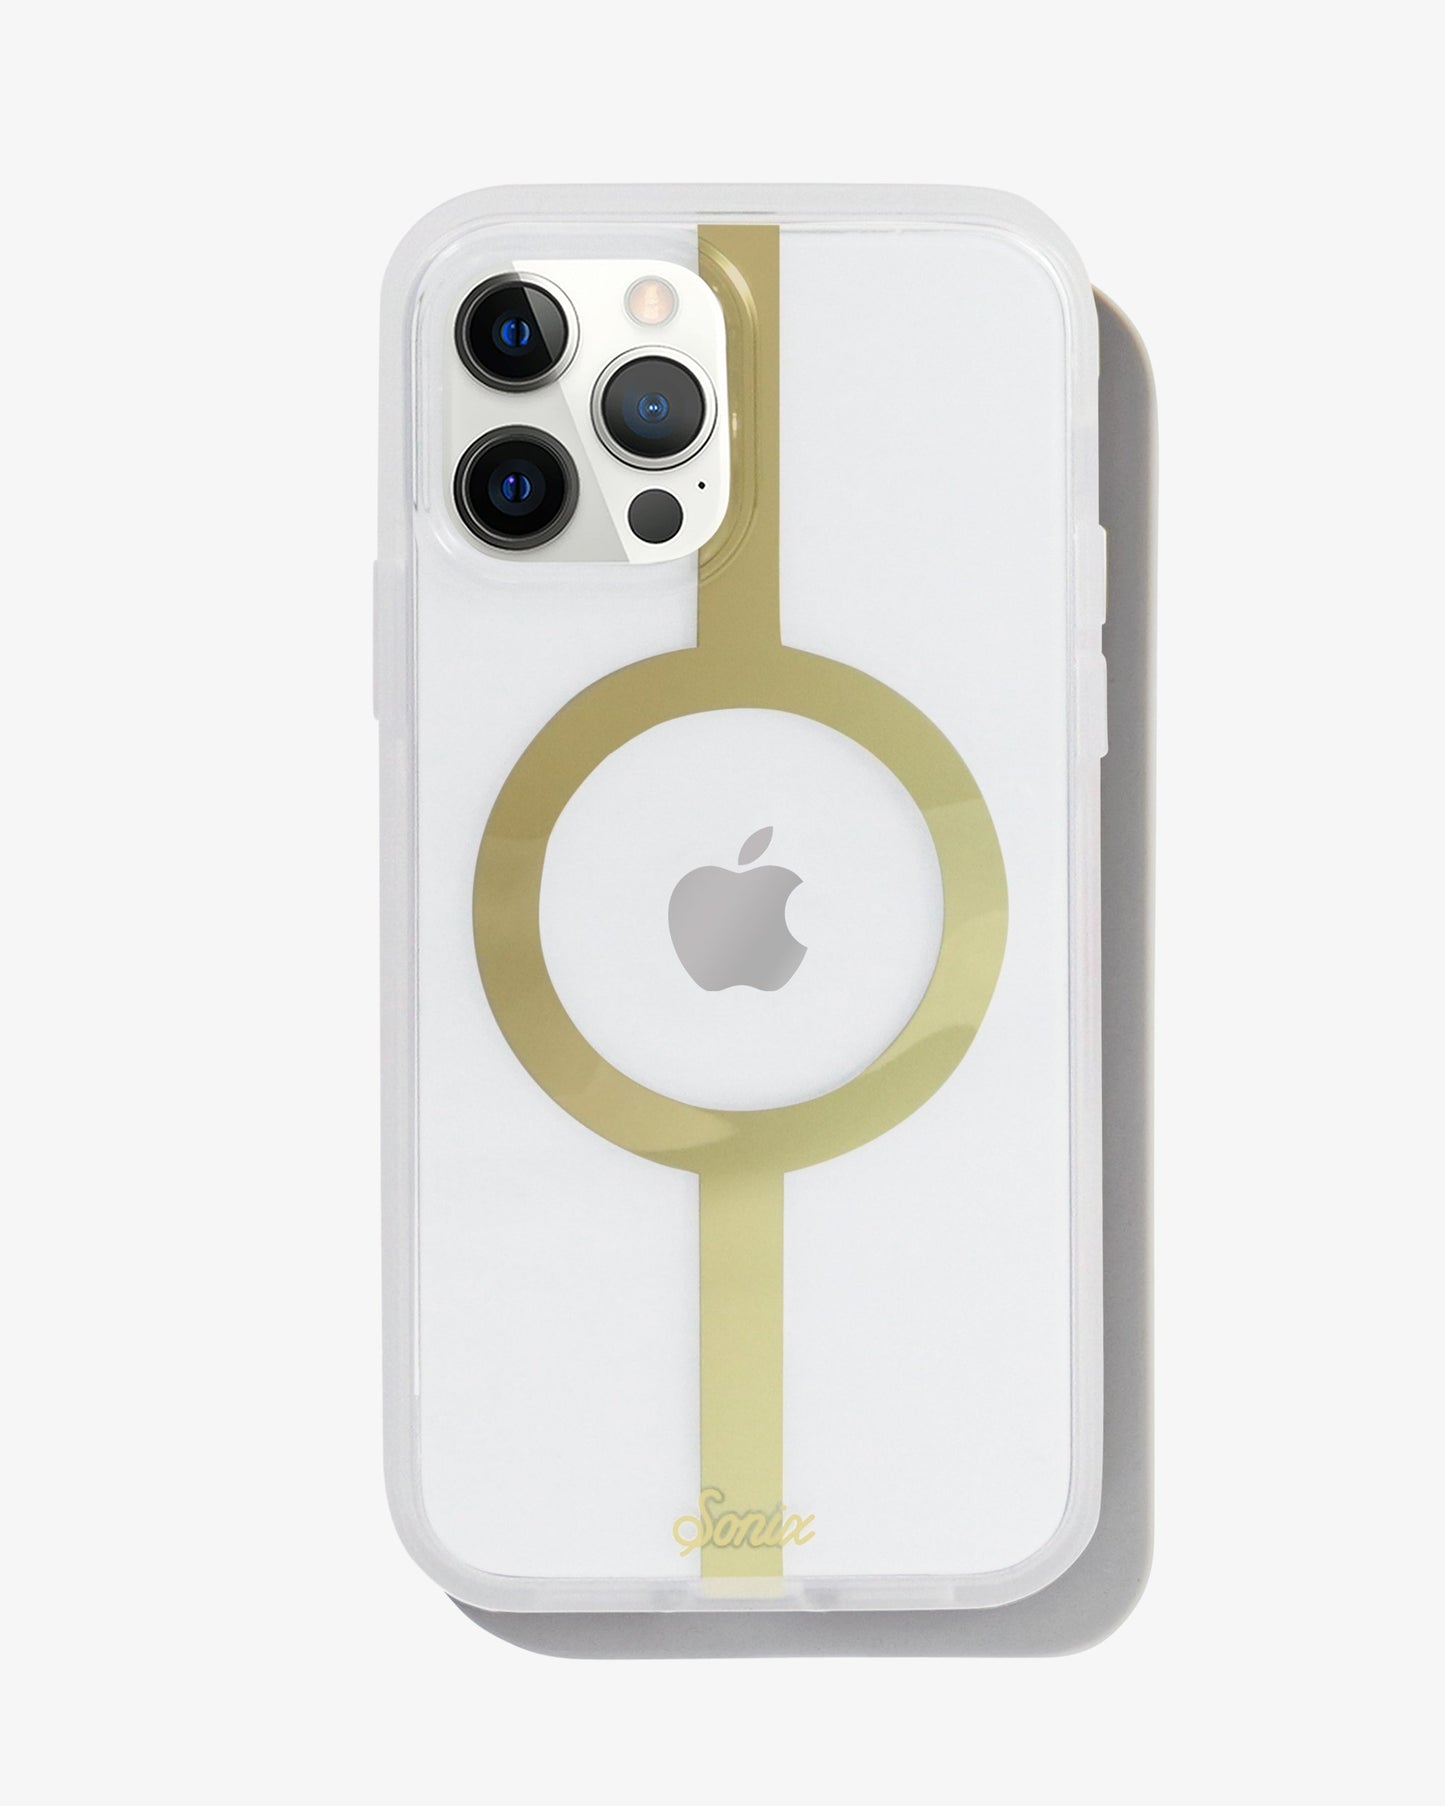 The Match MagSafe® Compatible iPhone Case - Gold